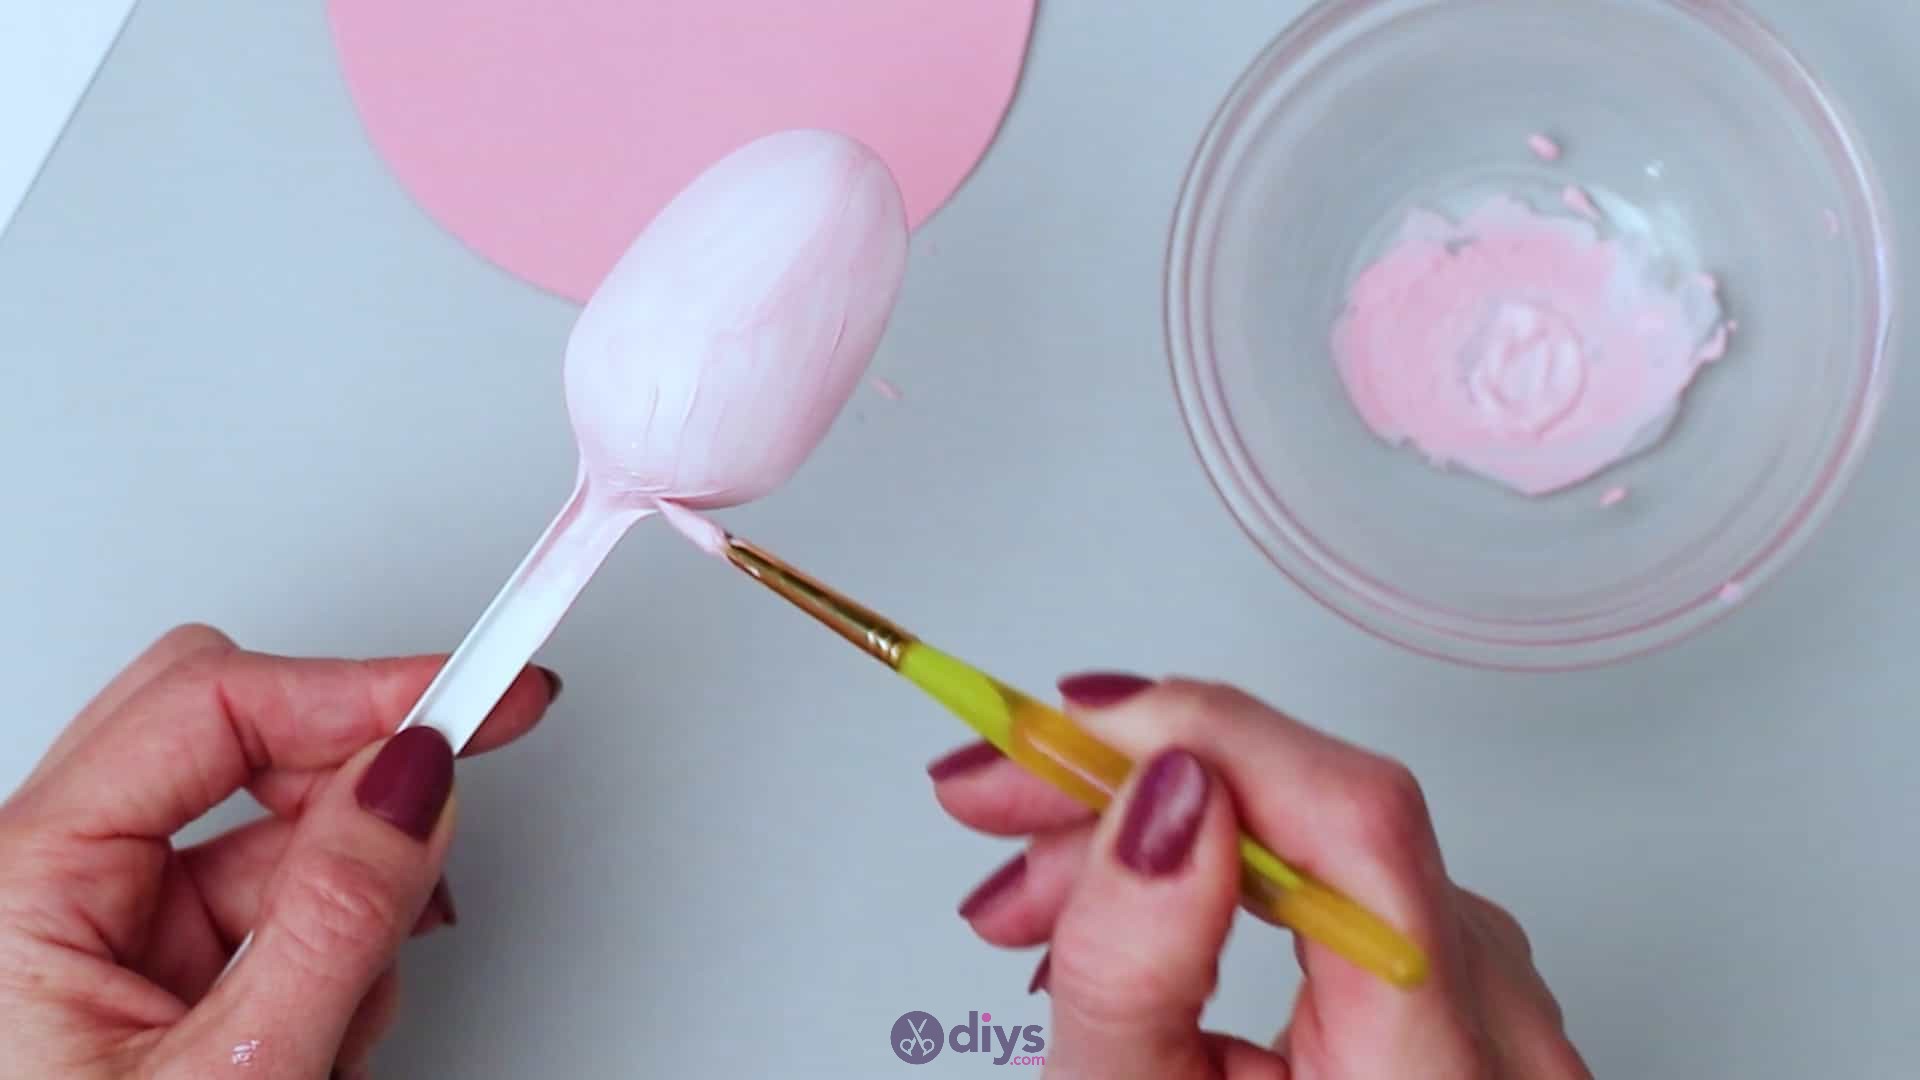 Diy plastic spoon candle holder step 3d